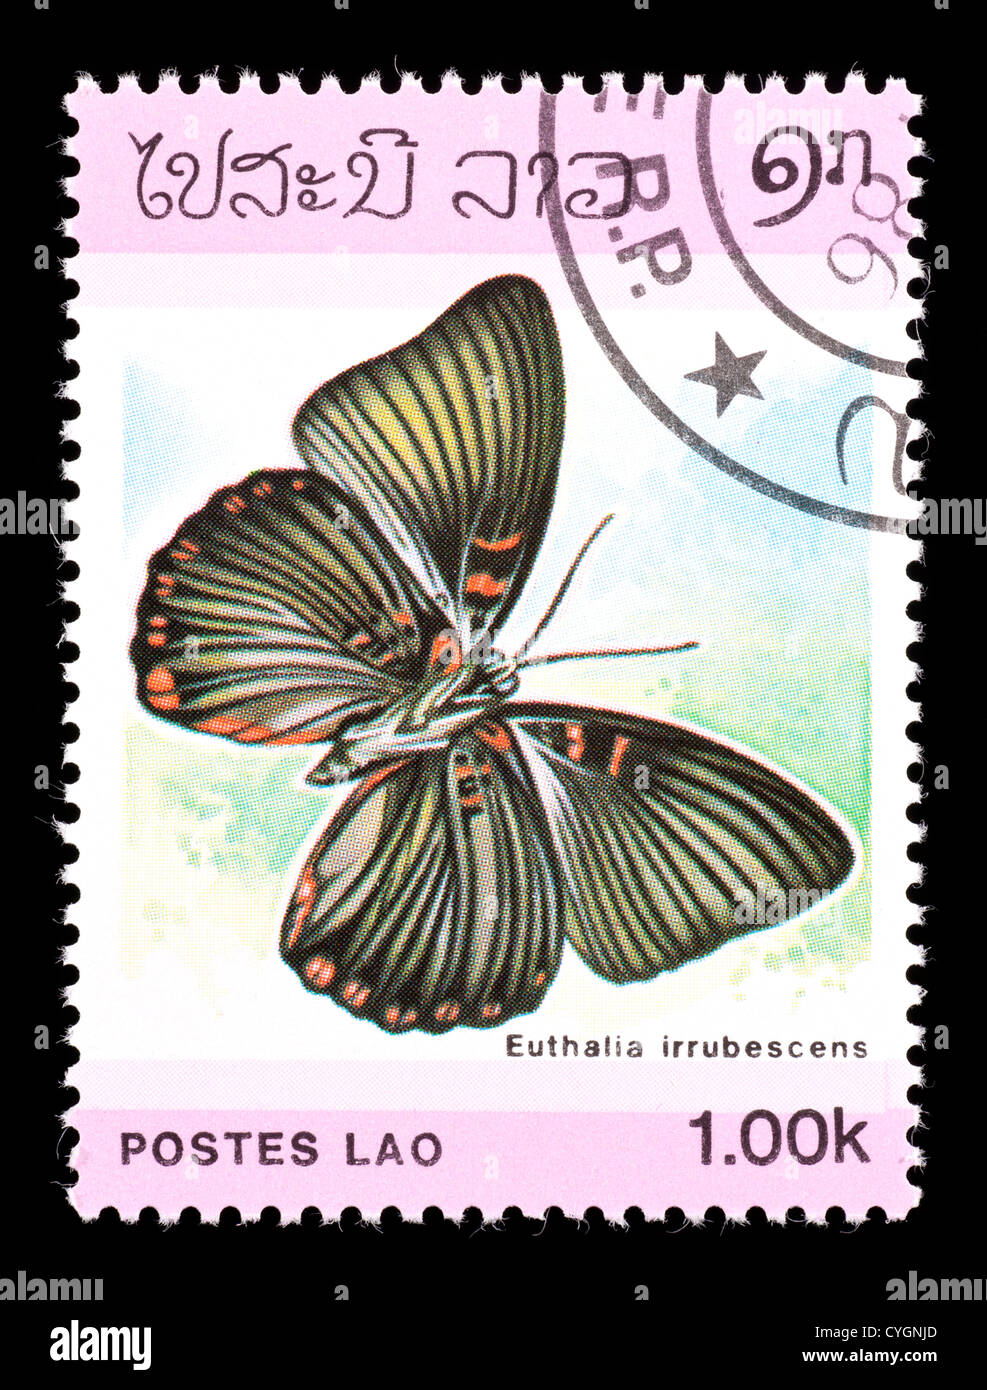 Postage stamp from Laos depicting depicting a tropical butterfly (Euthalia irrubescens) Stock Photo